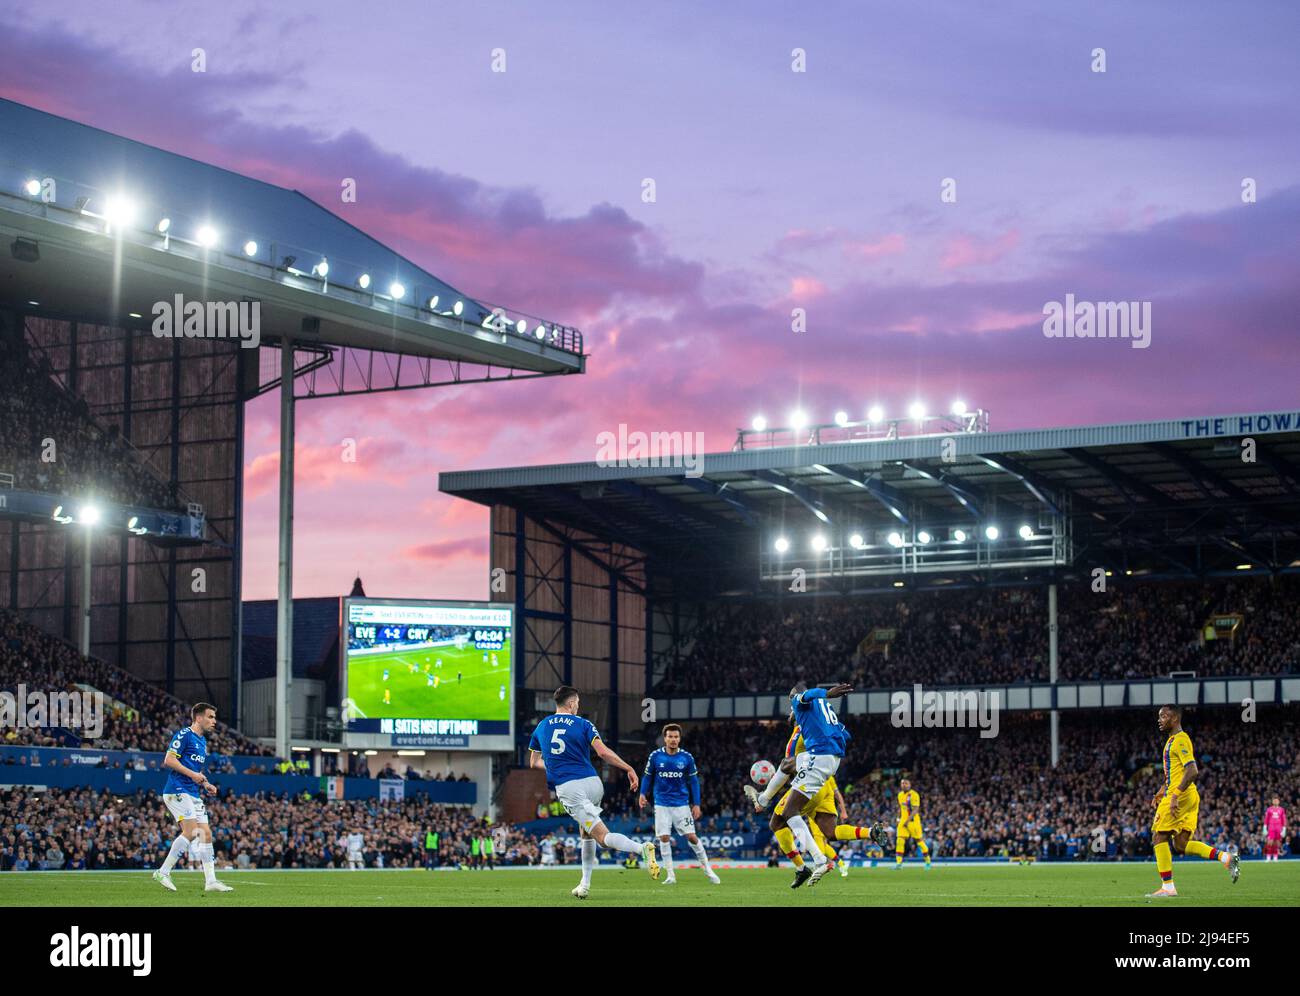 LIVERPOOL, ENGLAND - MAY 19: Wilfried Zaha during the Premier League match between Everton and Crystal Palace at Goodison Park on May 19, 2022 in Liverpool, United Kingdom. (Photo by Sebastian Frej) Stock Photo